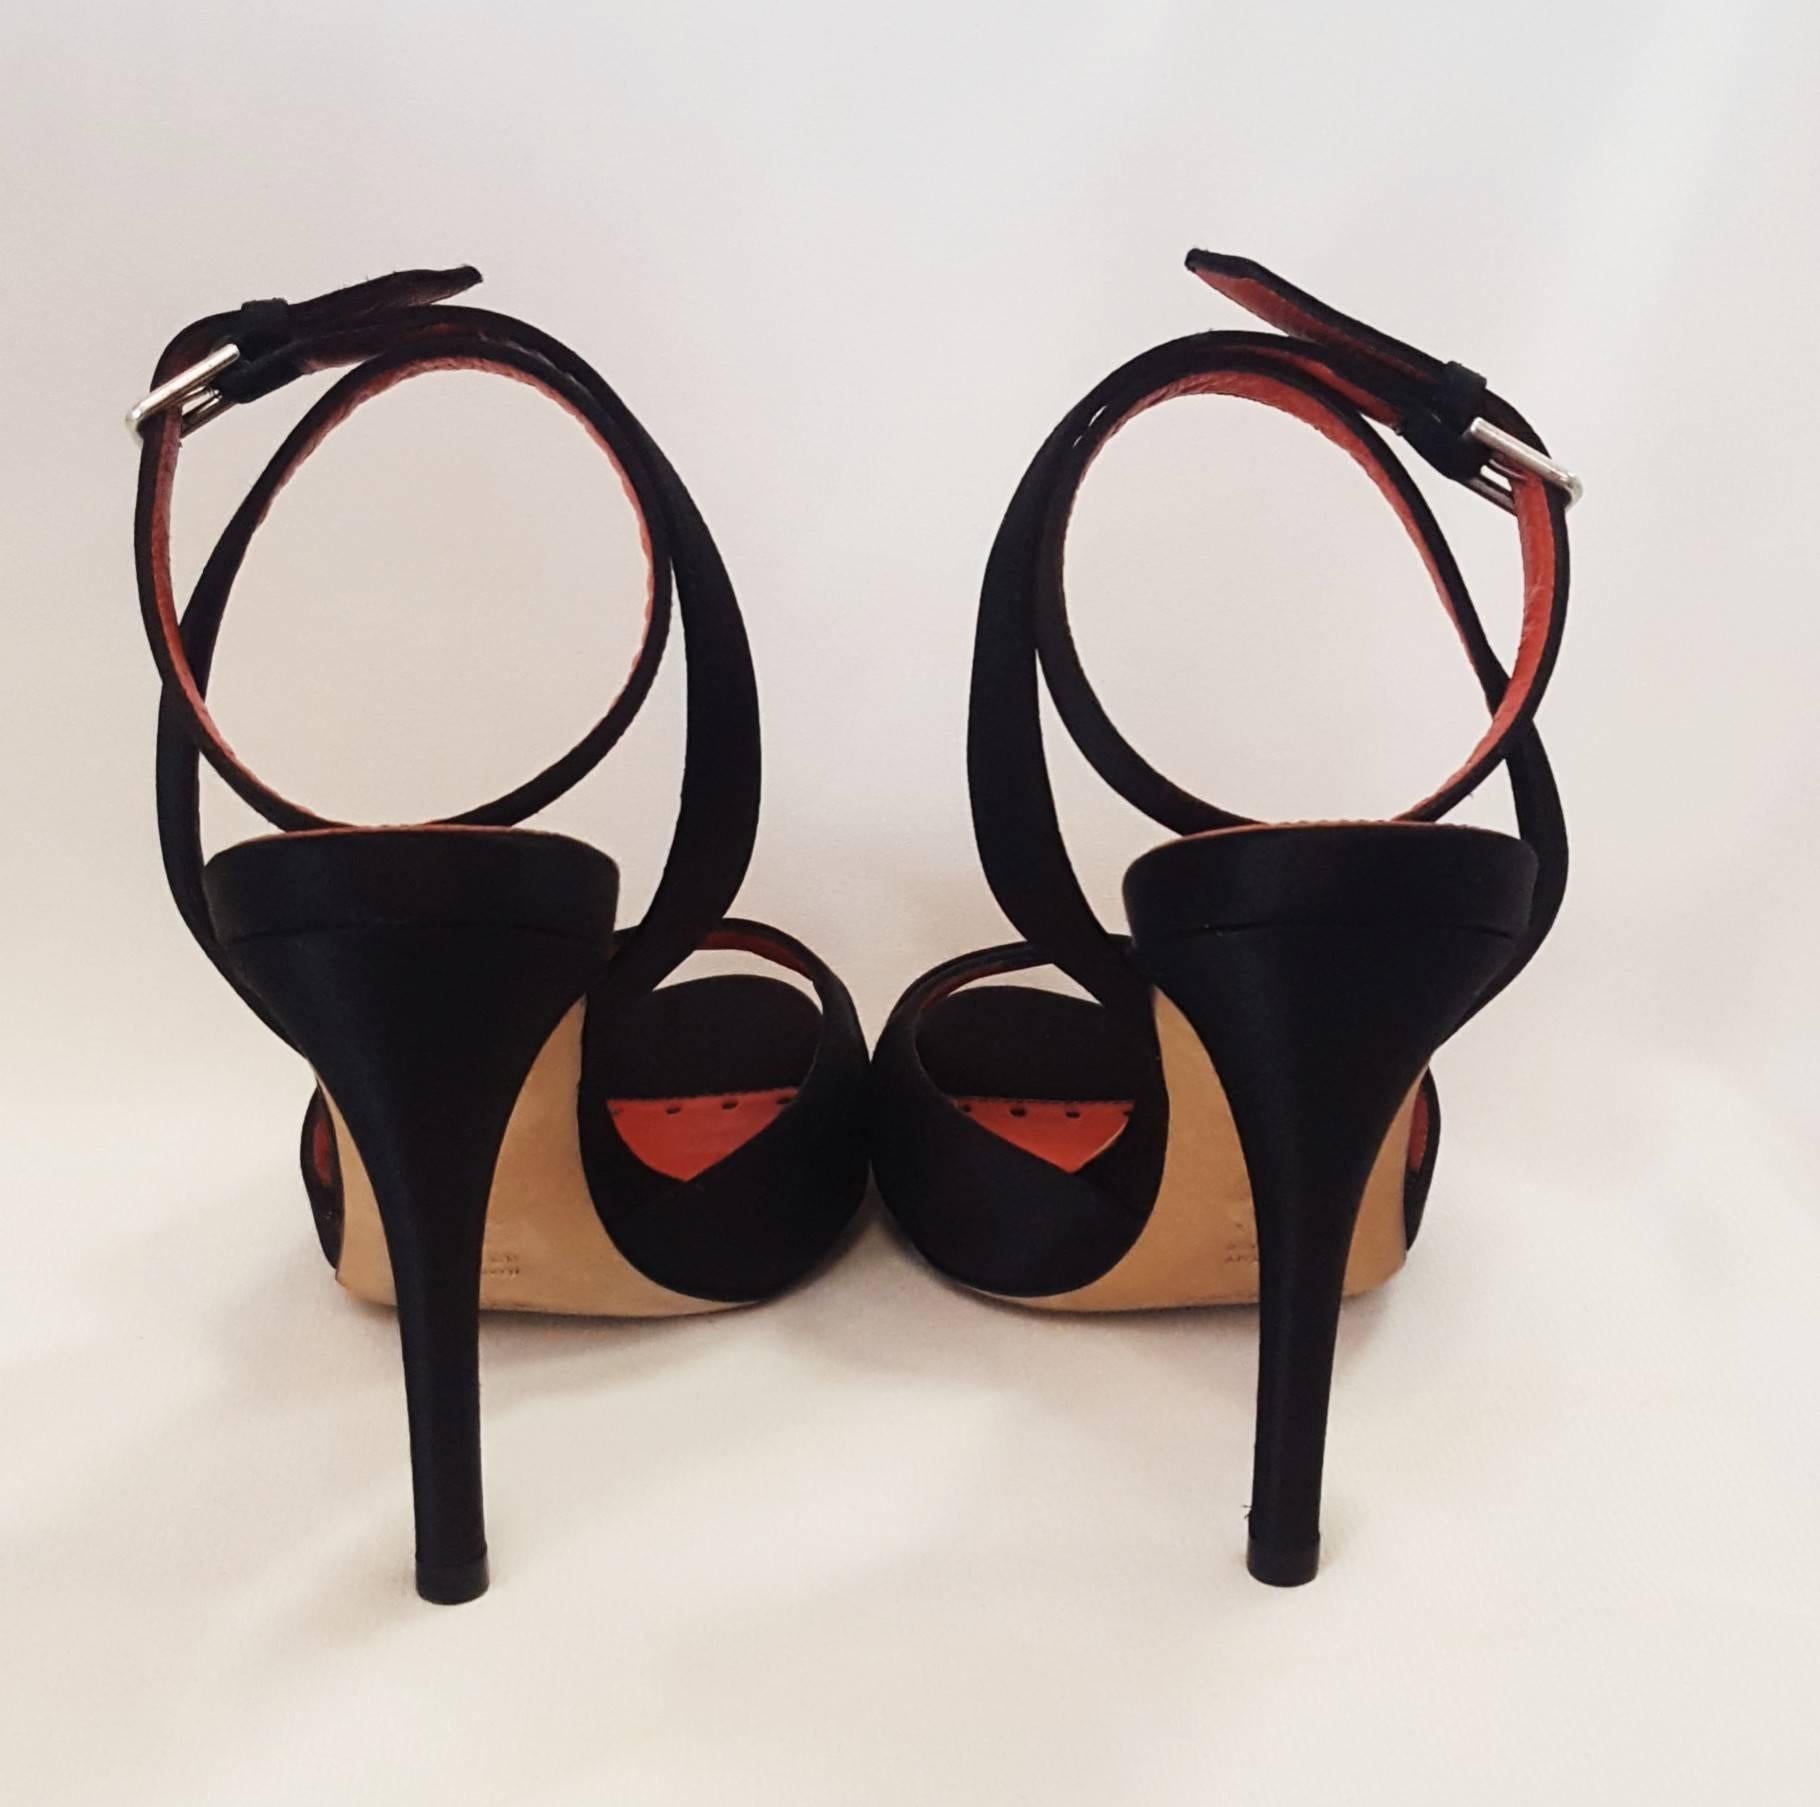 Yves Saint Laurent black satin with 4.5 heels with crisscross straps are perfect for an evening out or to dress up a pair of jeans.  These shoes are  lined in red leather and  have an ankle strap for added support, also, lined in red leather.  These